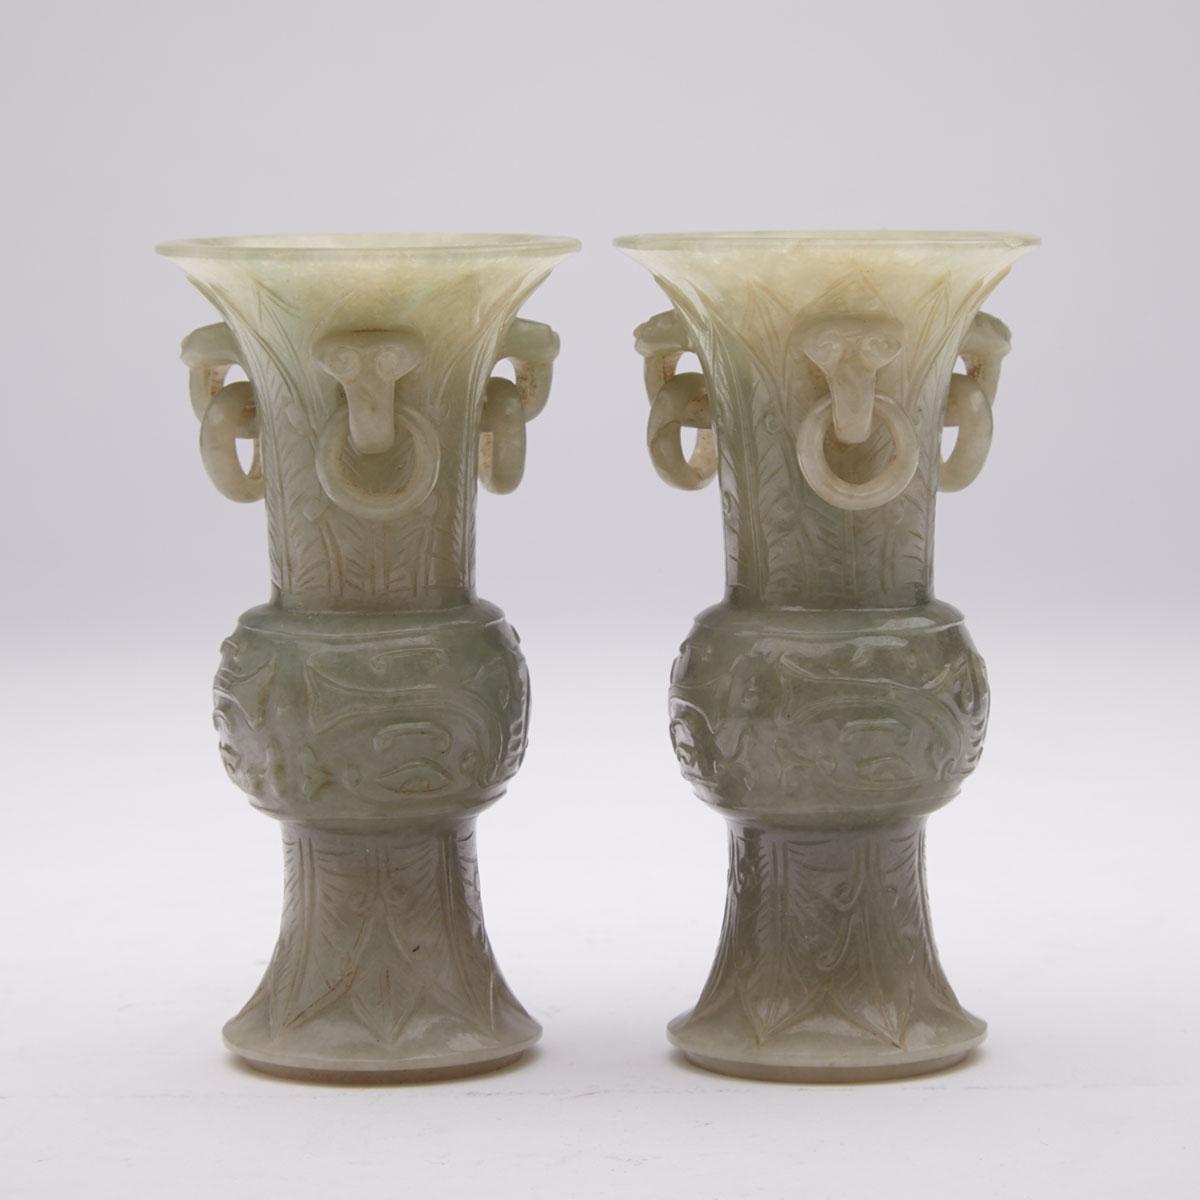 Pair of Jadeite Carved Miniature Archaistic Gu Vases, Late Qing Dynasty